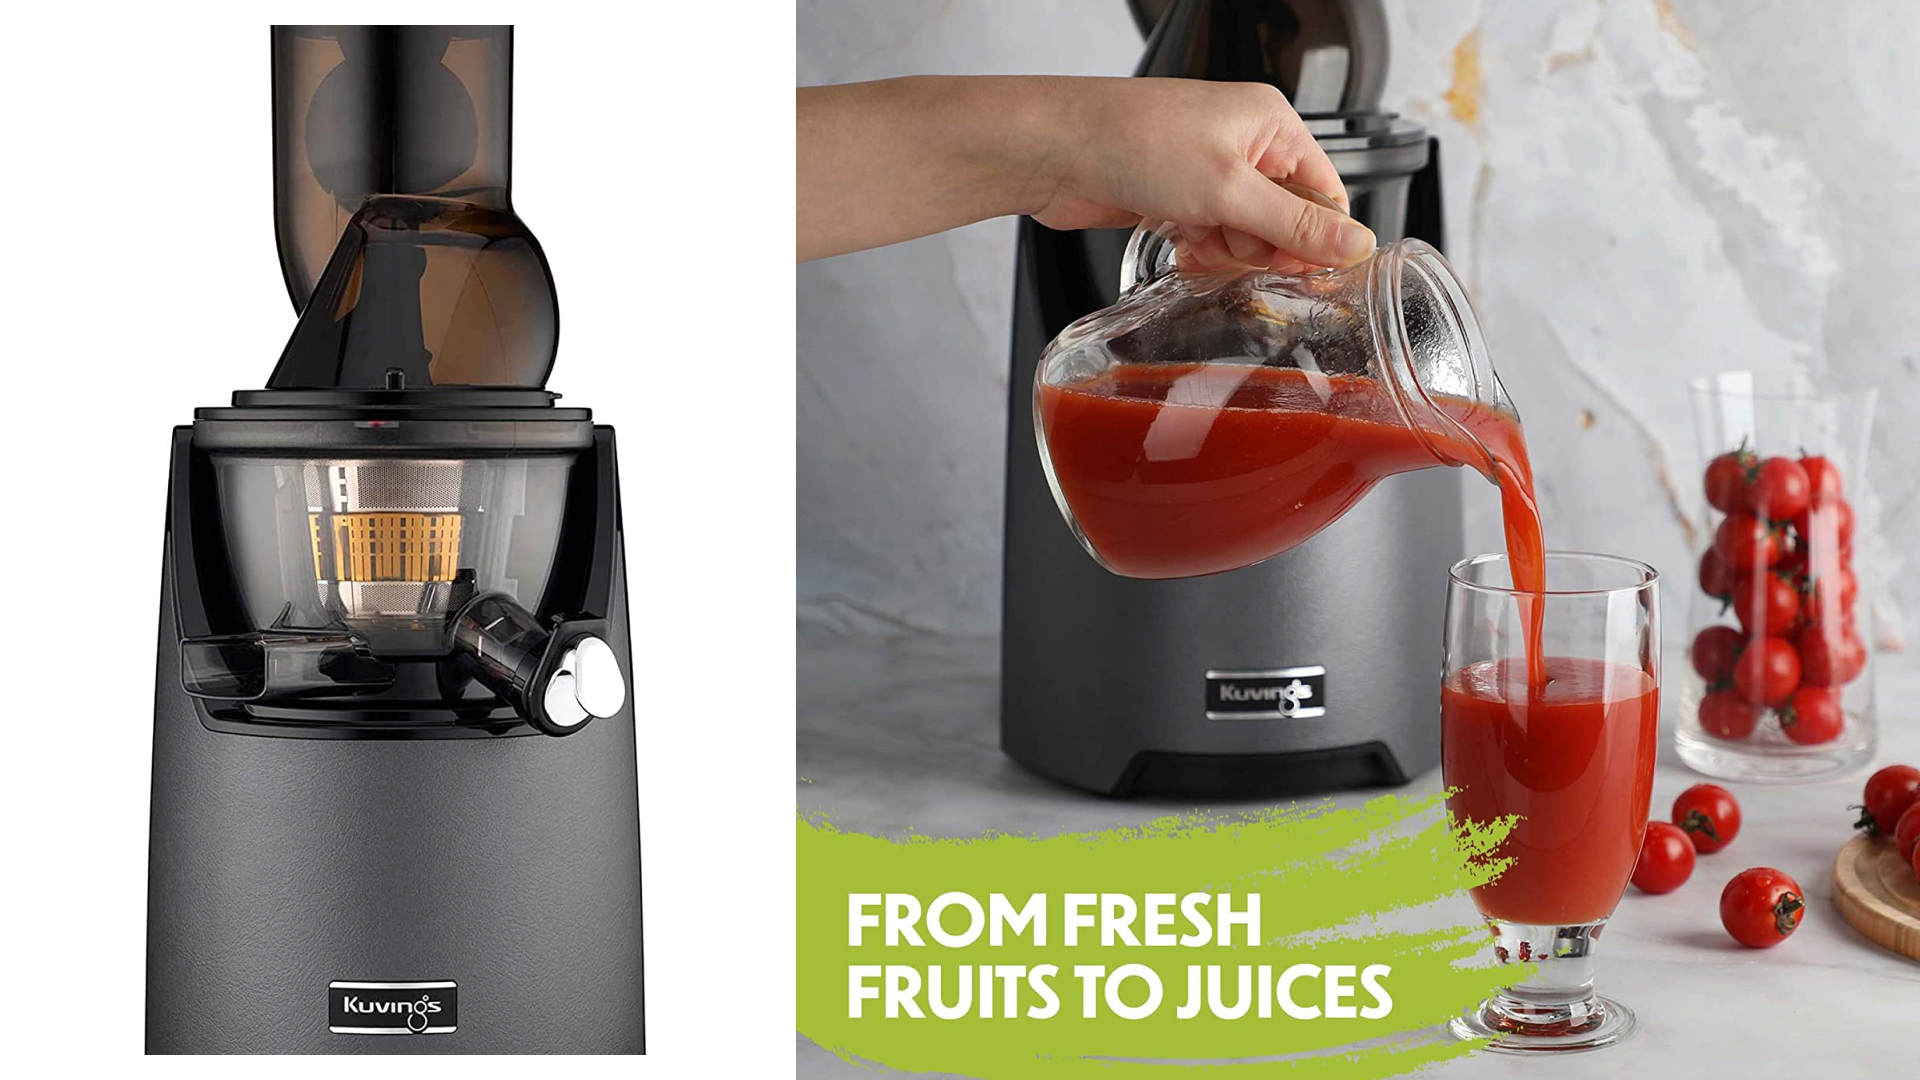 Kuvings juicer 